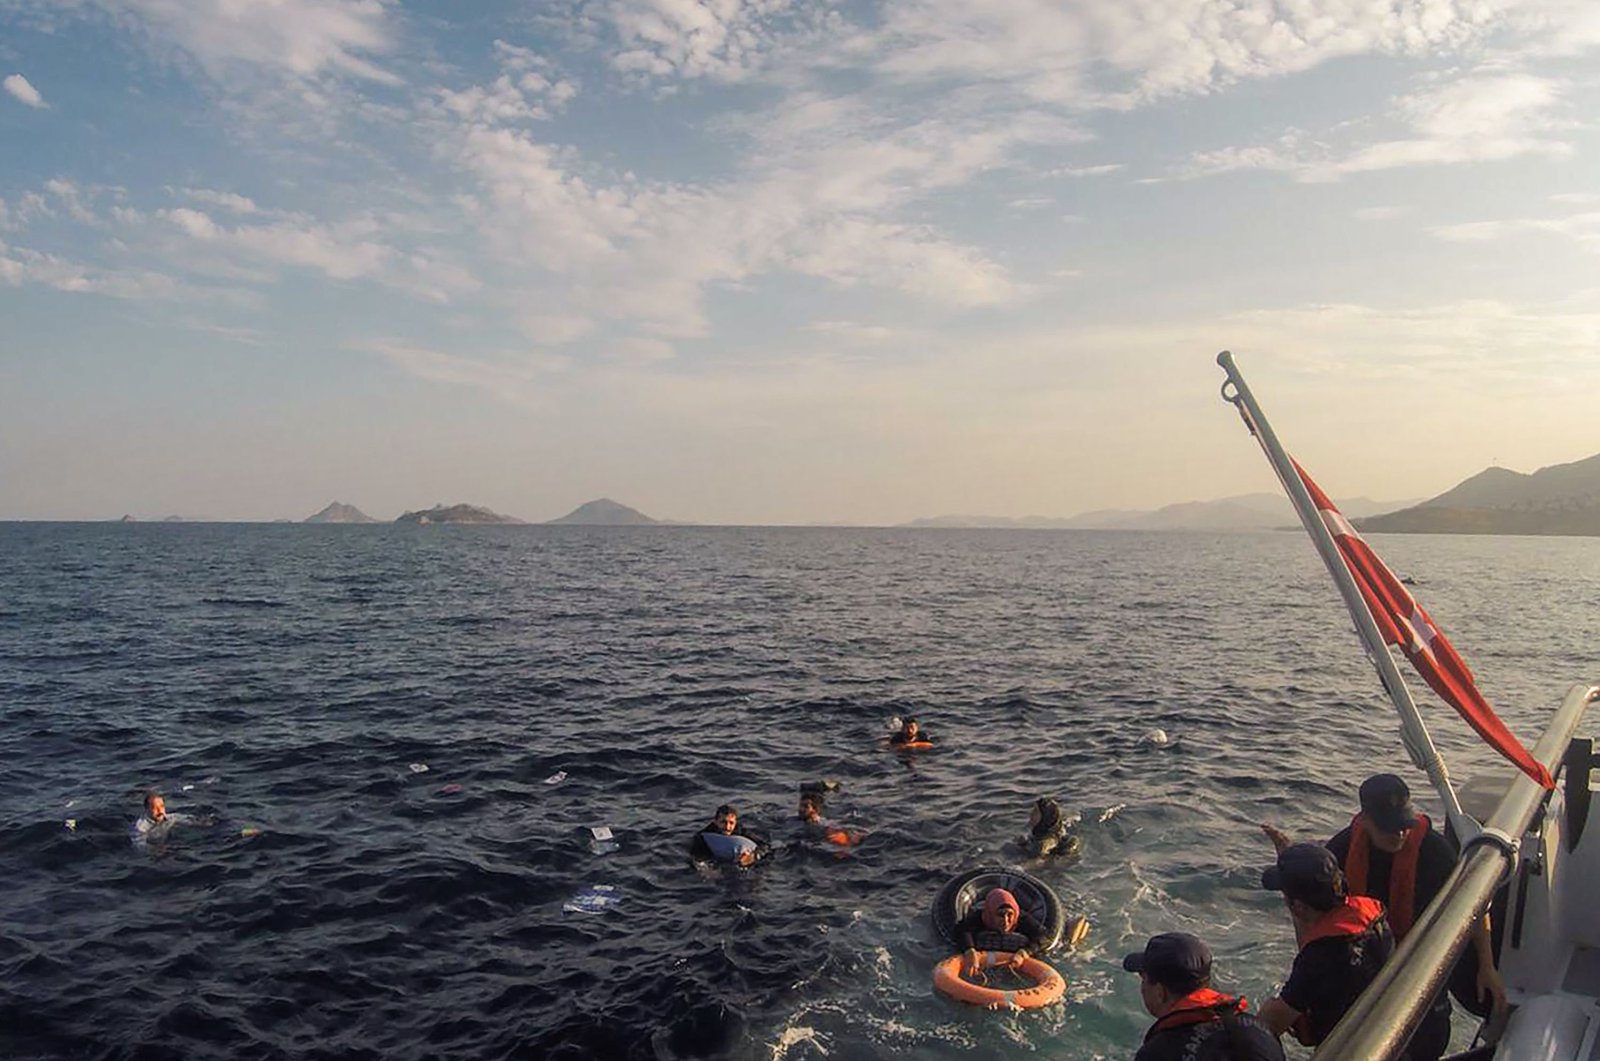 This handout picture released and taken on June 17, 2019 by the Turkish coastguard shows illegal migrants being rescued after their boat sank in the Aegean sea, off the coast of southwestern Turkey. (AFP Photo)